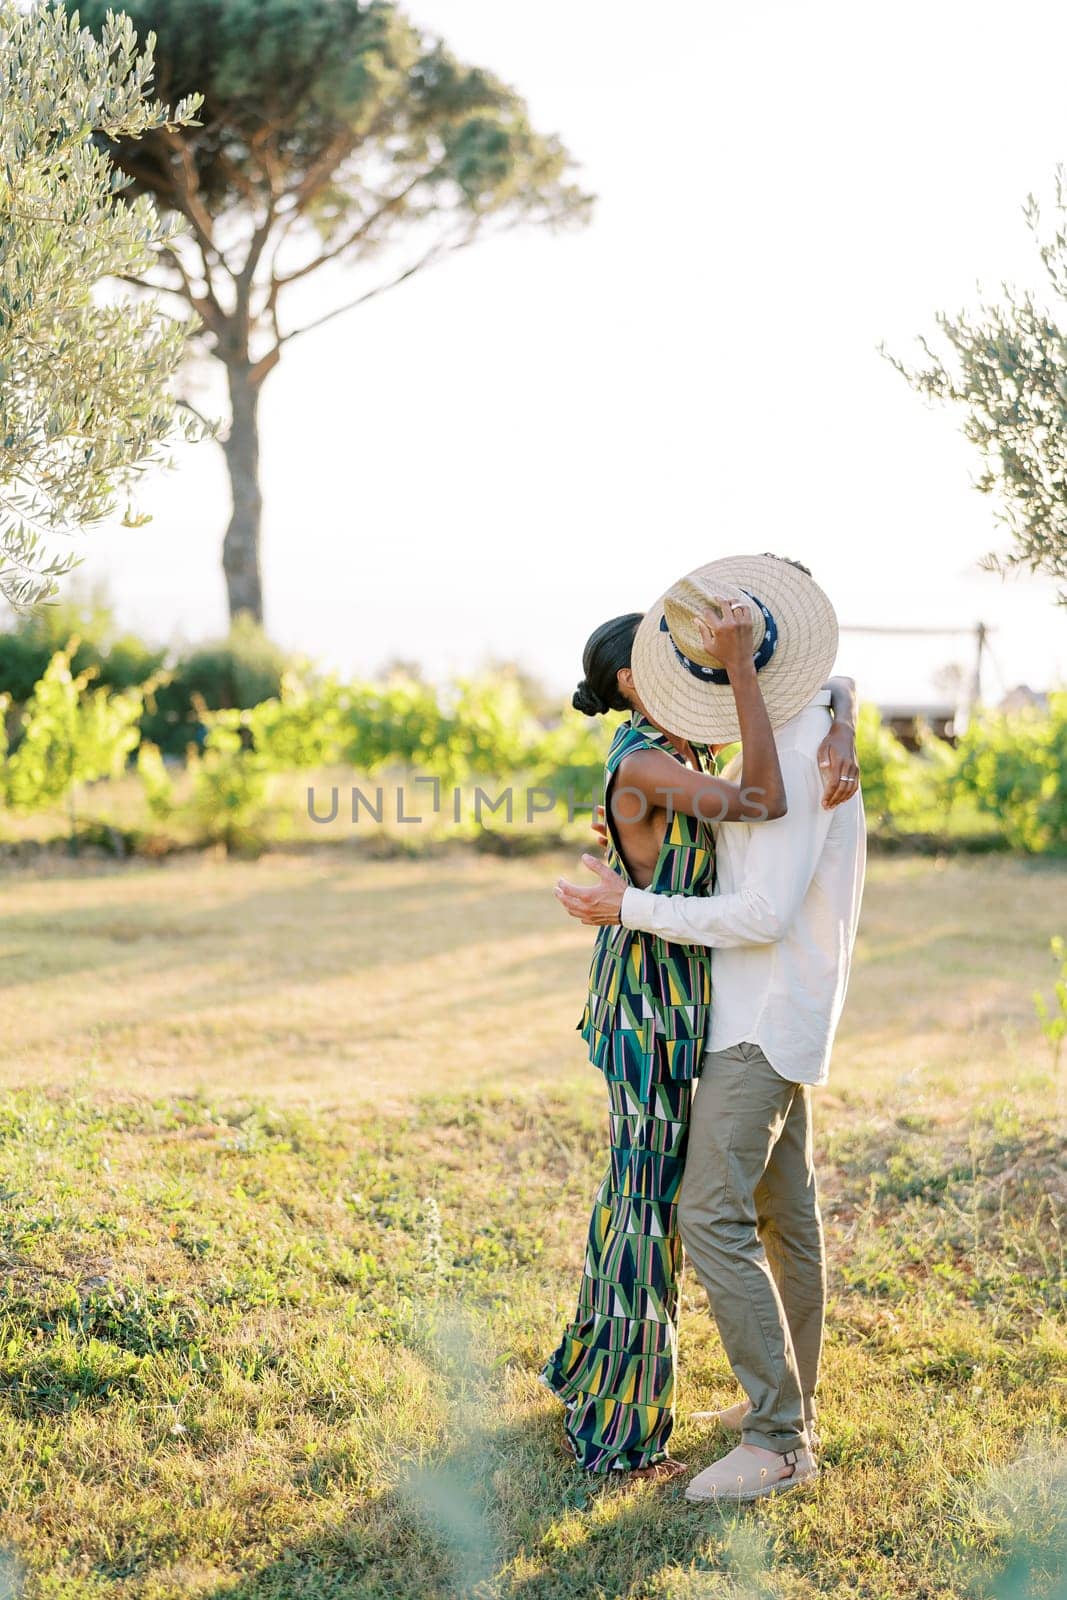 Man kisses woman while standing in a green garden and hiding behind a straw hat by Nadtochiy